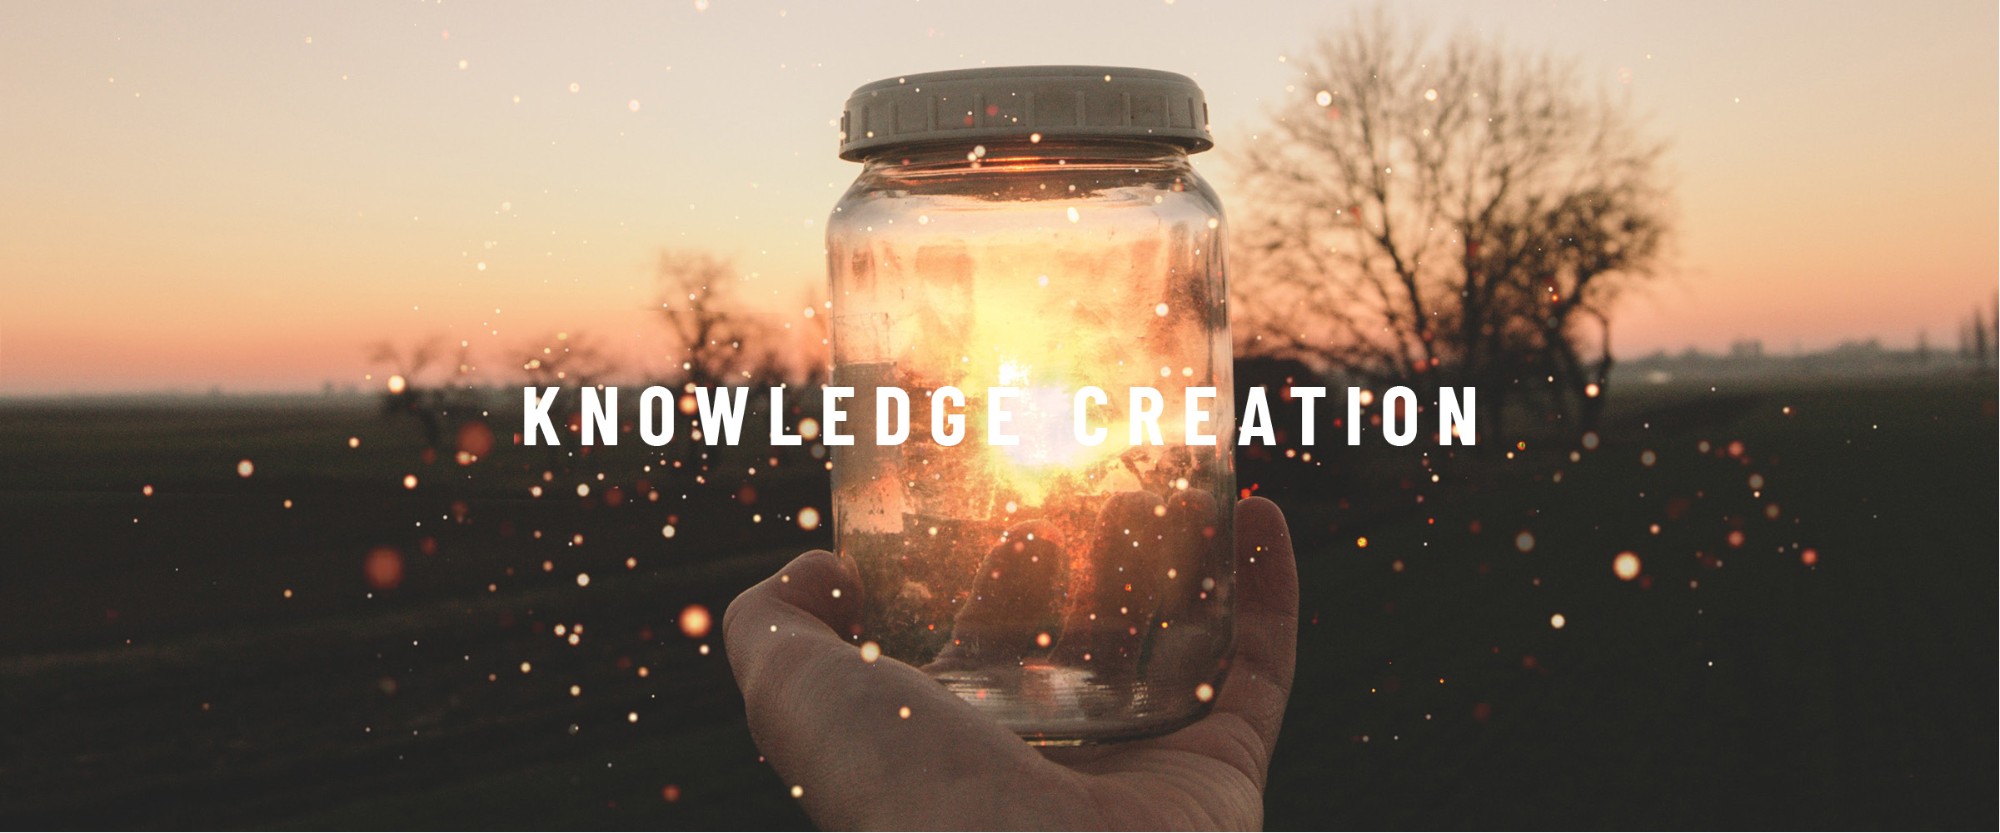 Text: Knowledge Creation